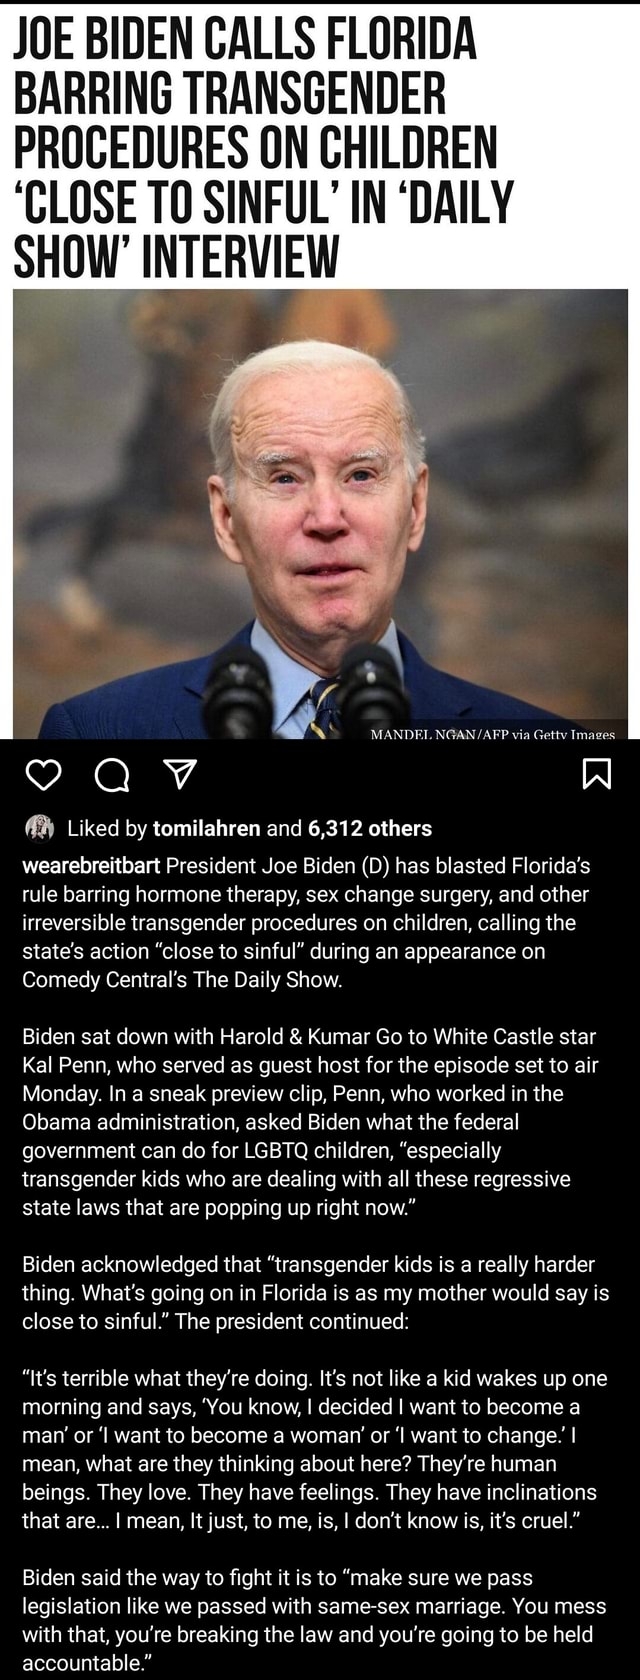 JOE BIDEN CALLS FLORIDA BARRING TRANSGENDER PROCEDURES ON CHILDREN CLOSE TO SINFUL IN DAILY SHOW INTERVIEW MANDEL NGAN via Getty Images 9 AV Liked by tomilahren and 6,312 others wearebreitbart President pic